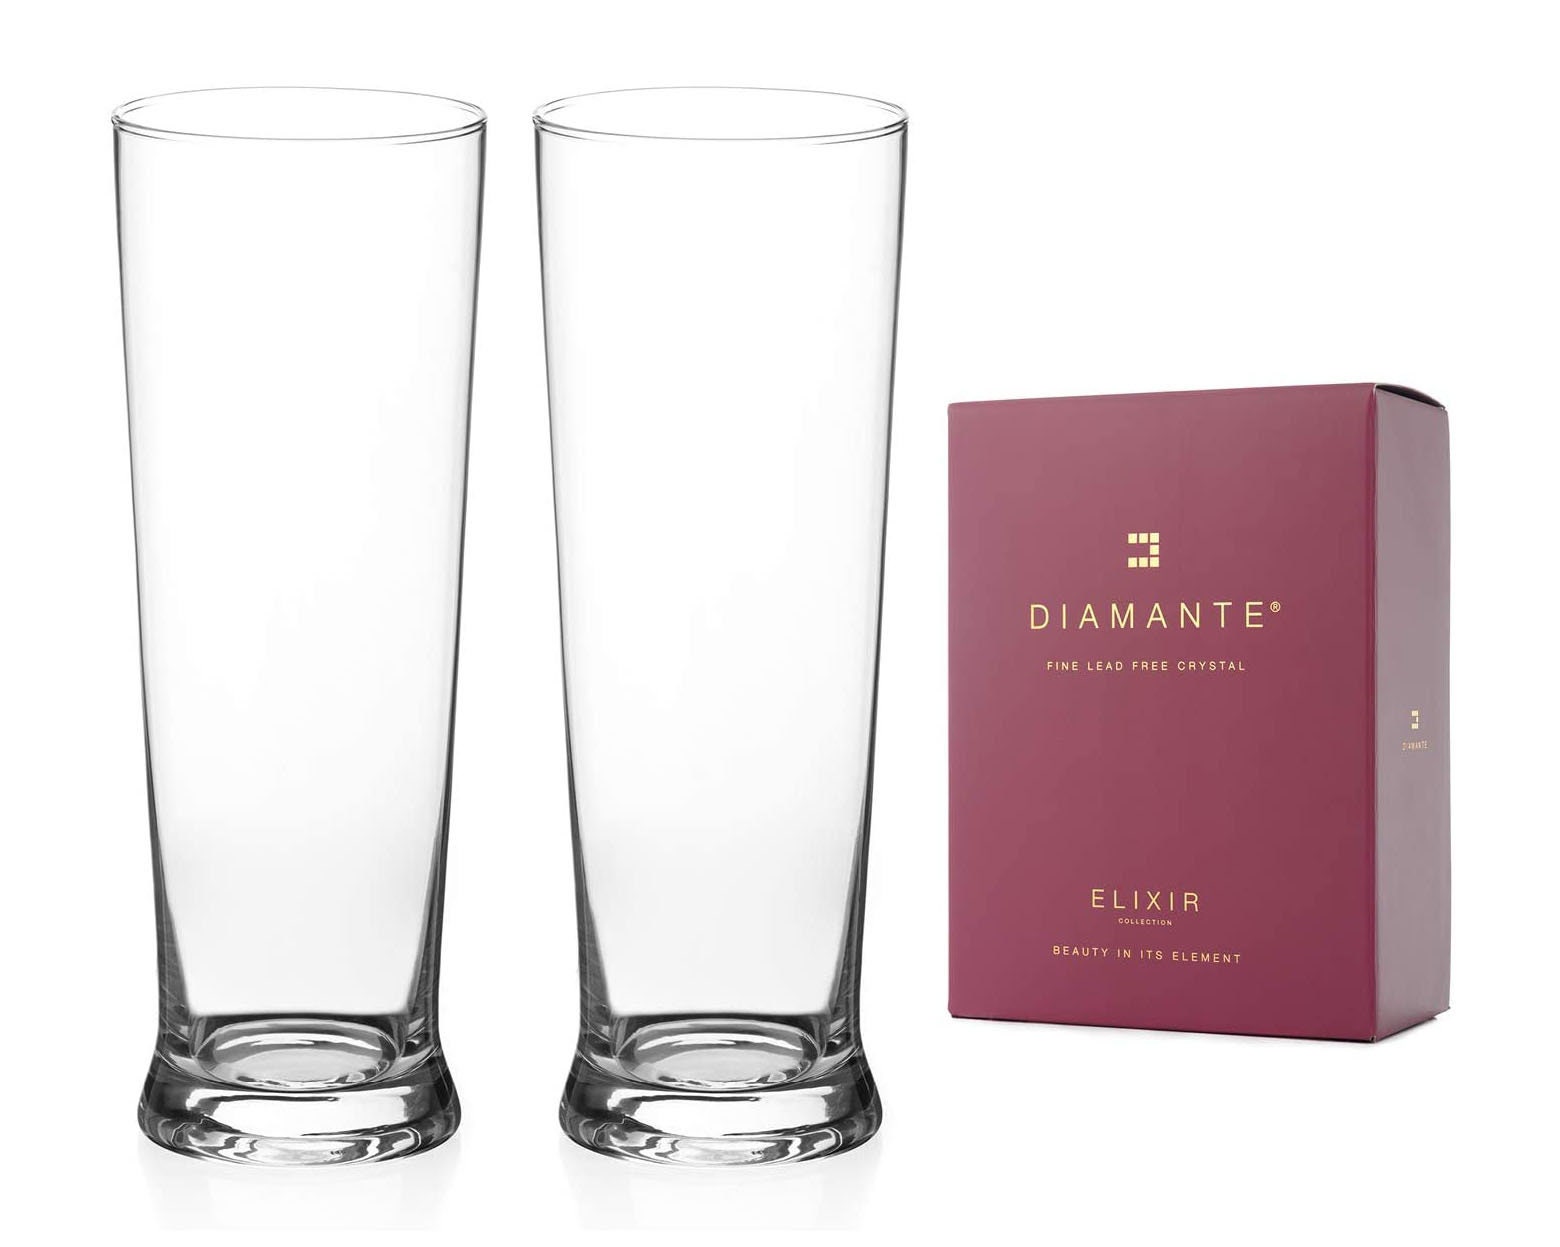 USA Made Nucleated Pilsner Glasses- Etched Beer Glass for Better Head  Retention, Aroma and Flavor - …See more USA Made Nucleated Pilsner Glasses